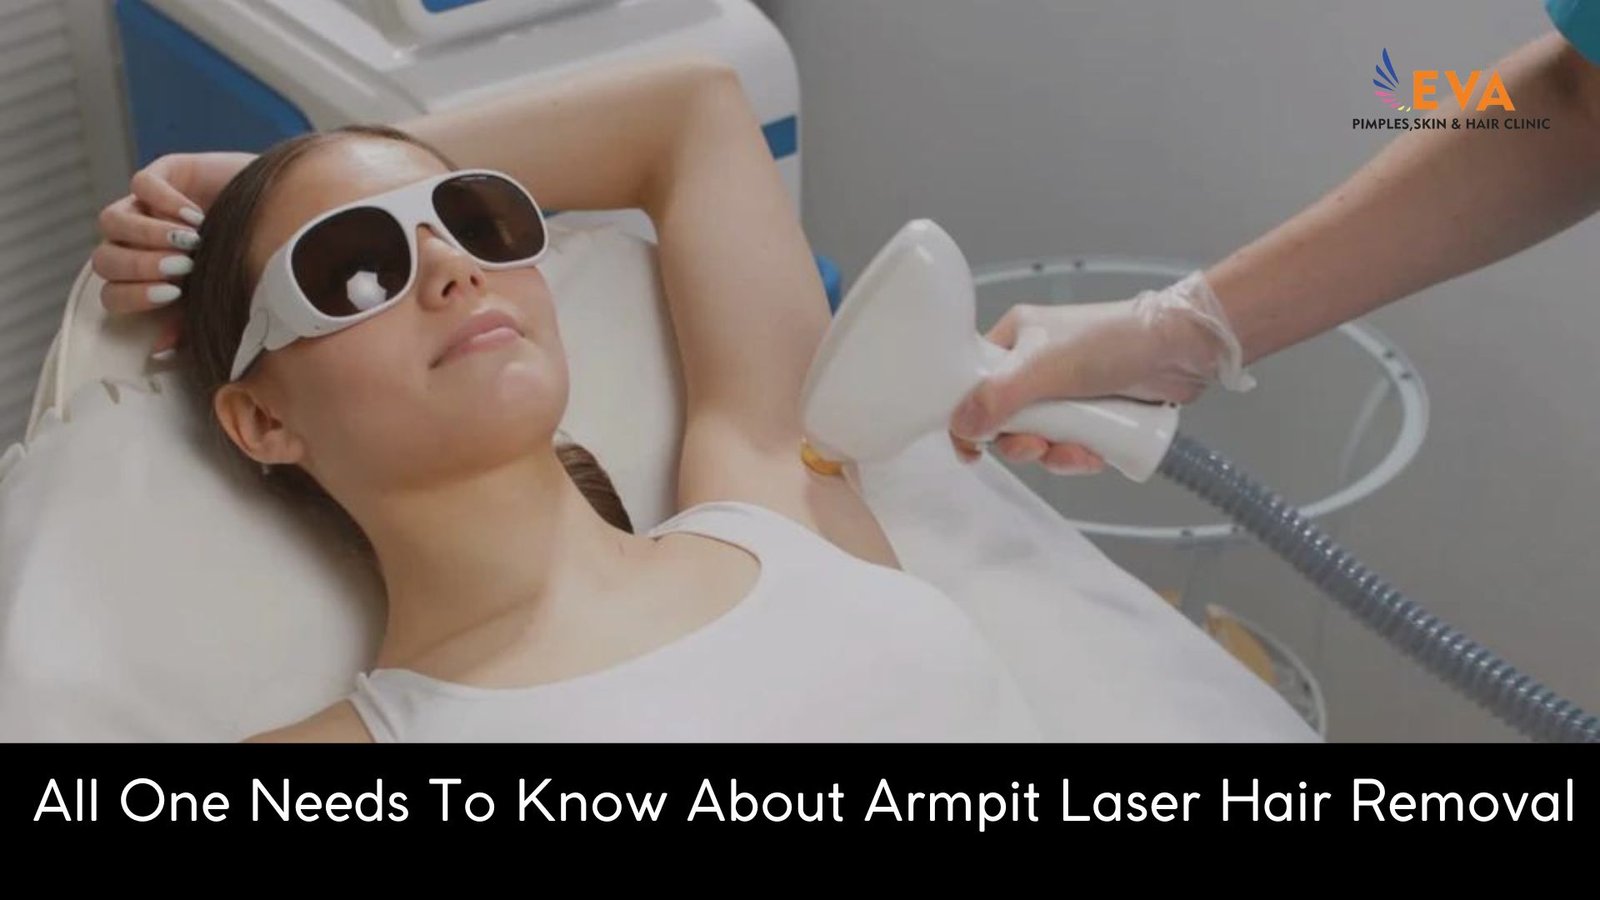 All-One-Needs-To-Know-About-Armpit-Laser-Hair-Removal-Banner